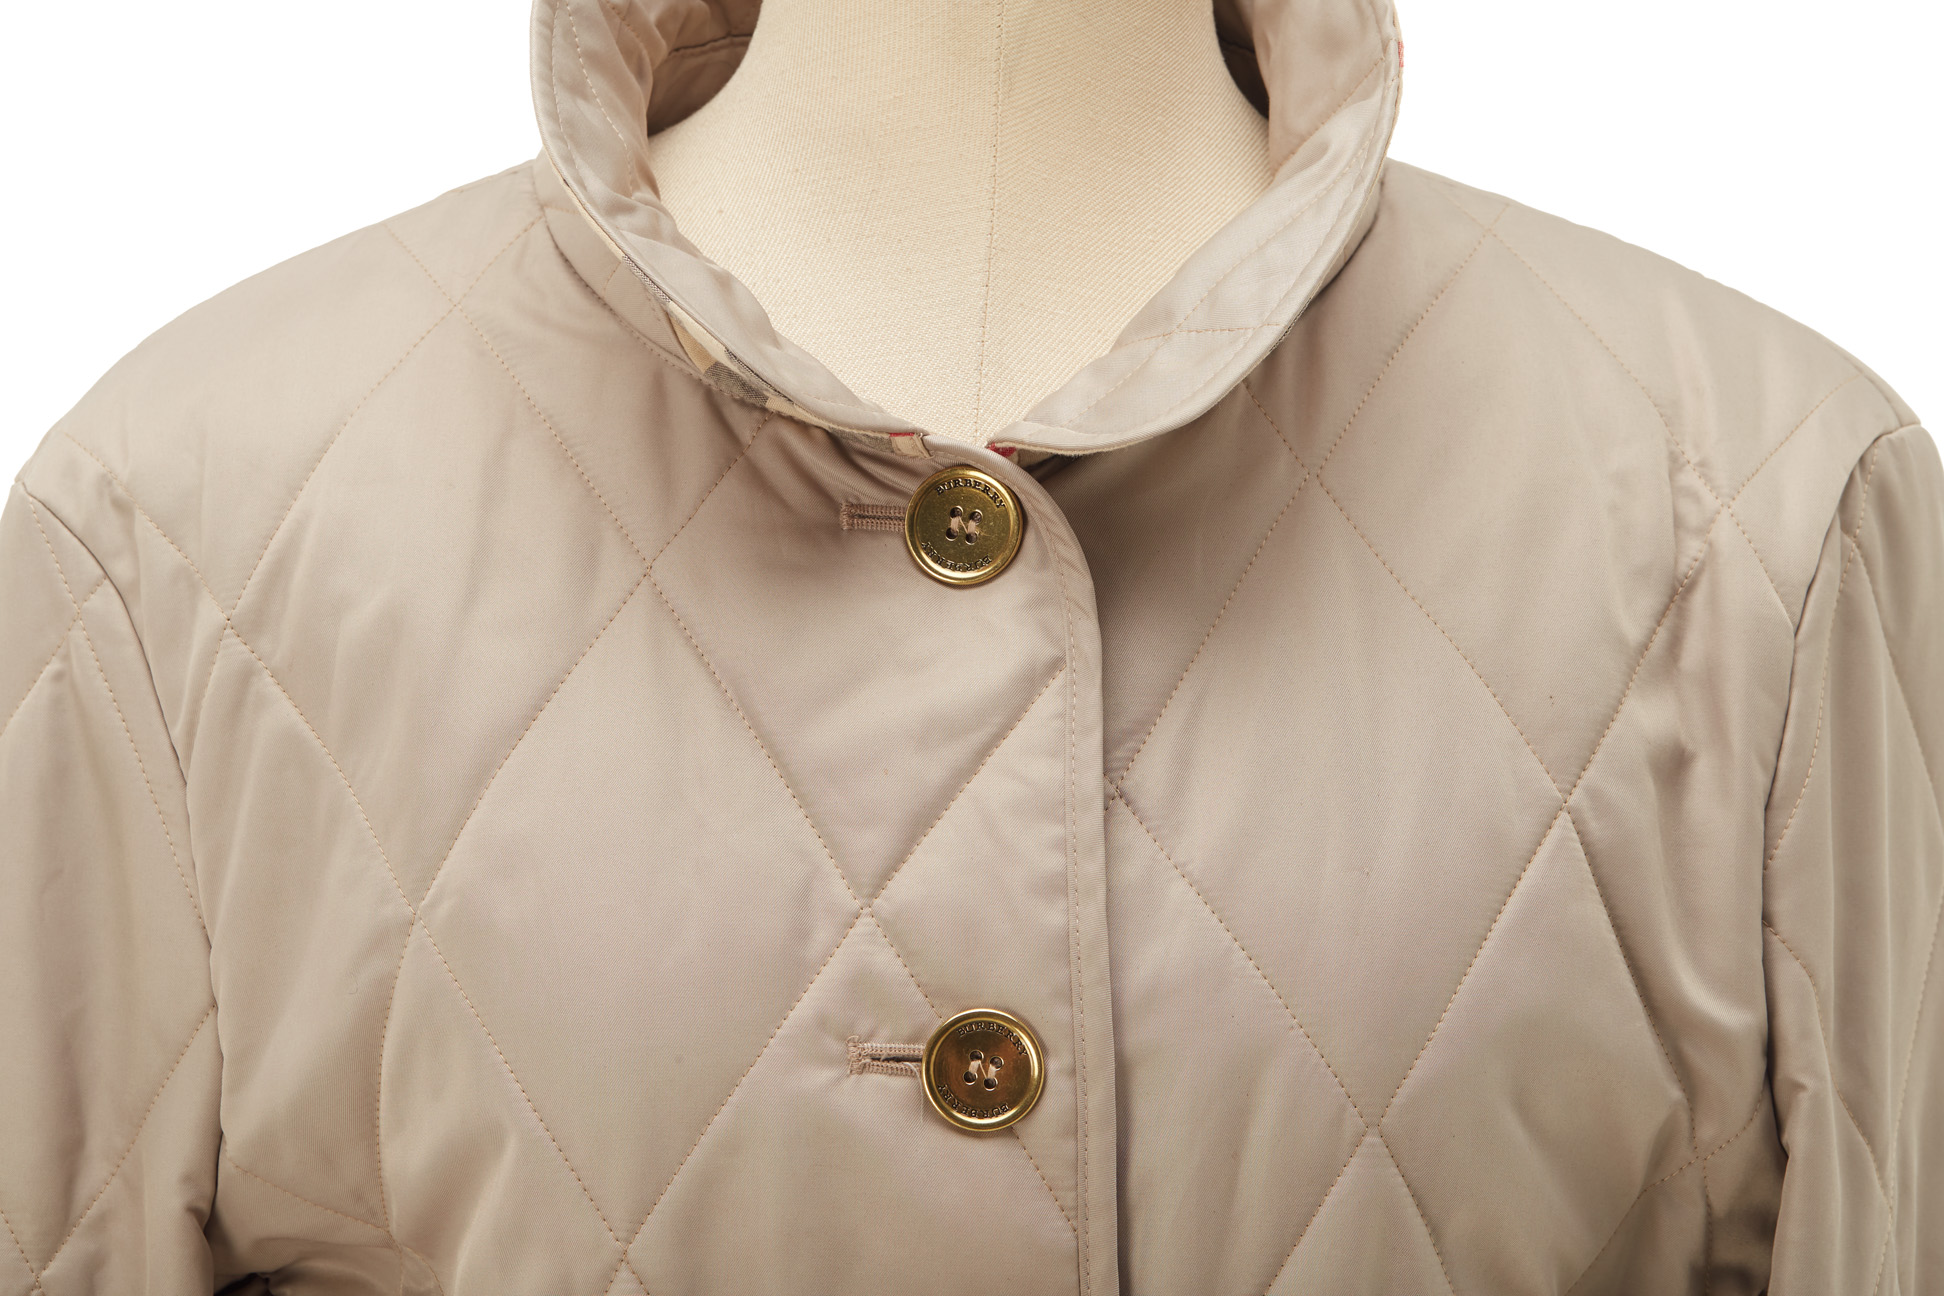 A BURBERRY QUILTED HONEY JACKET - Image 2 of 4